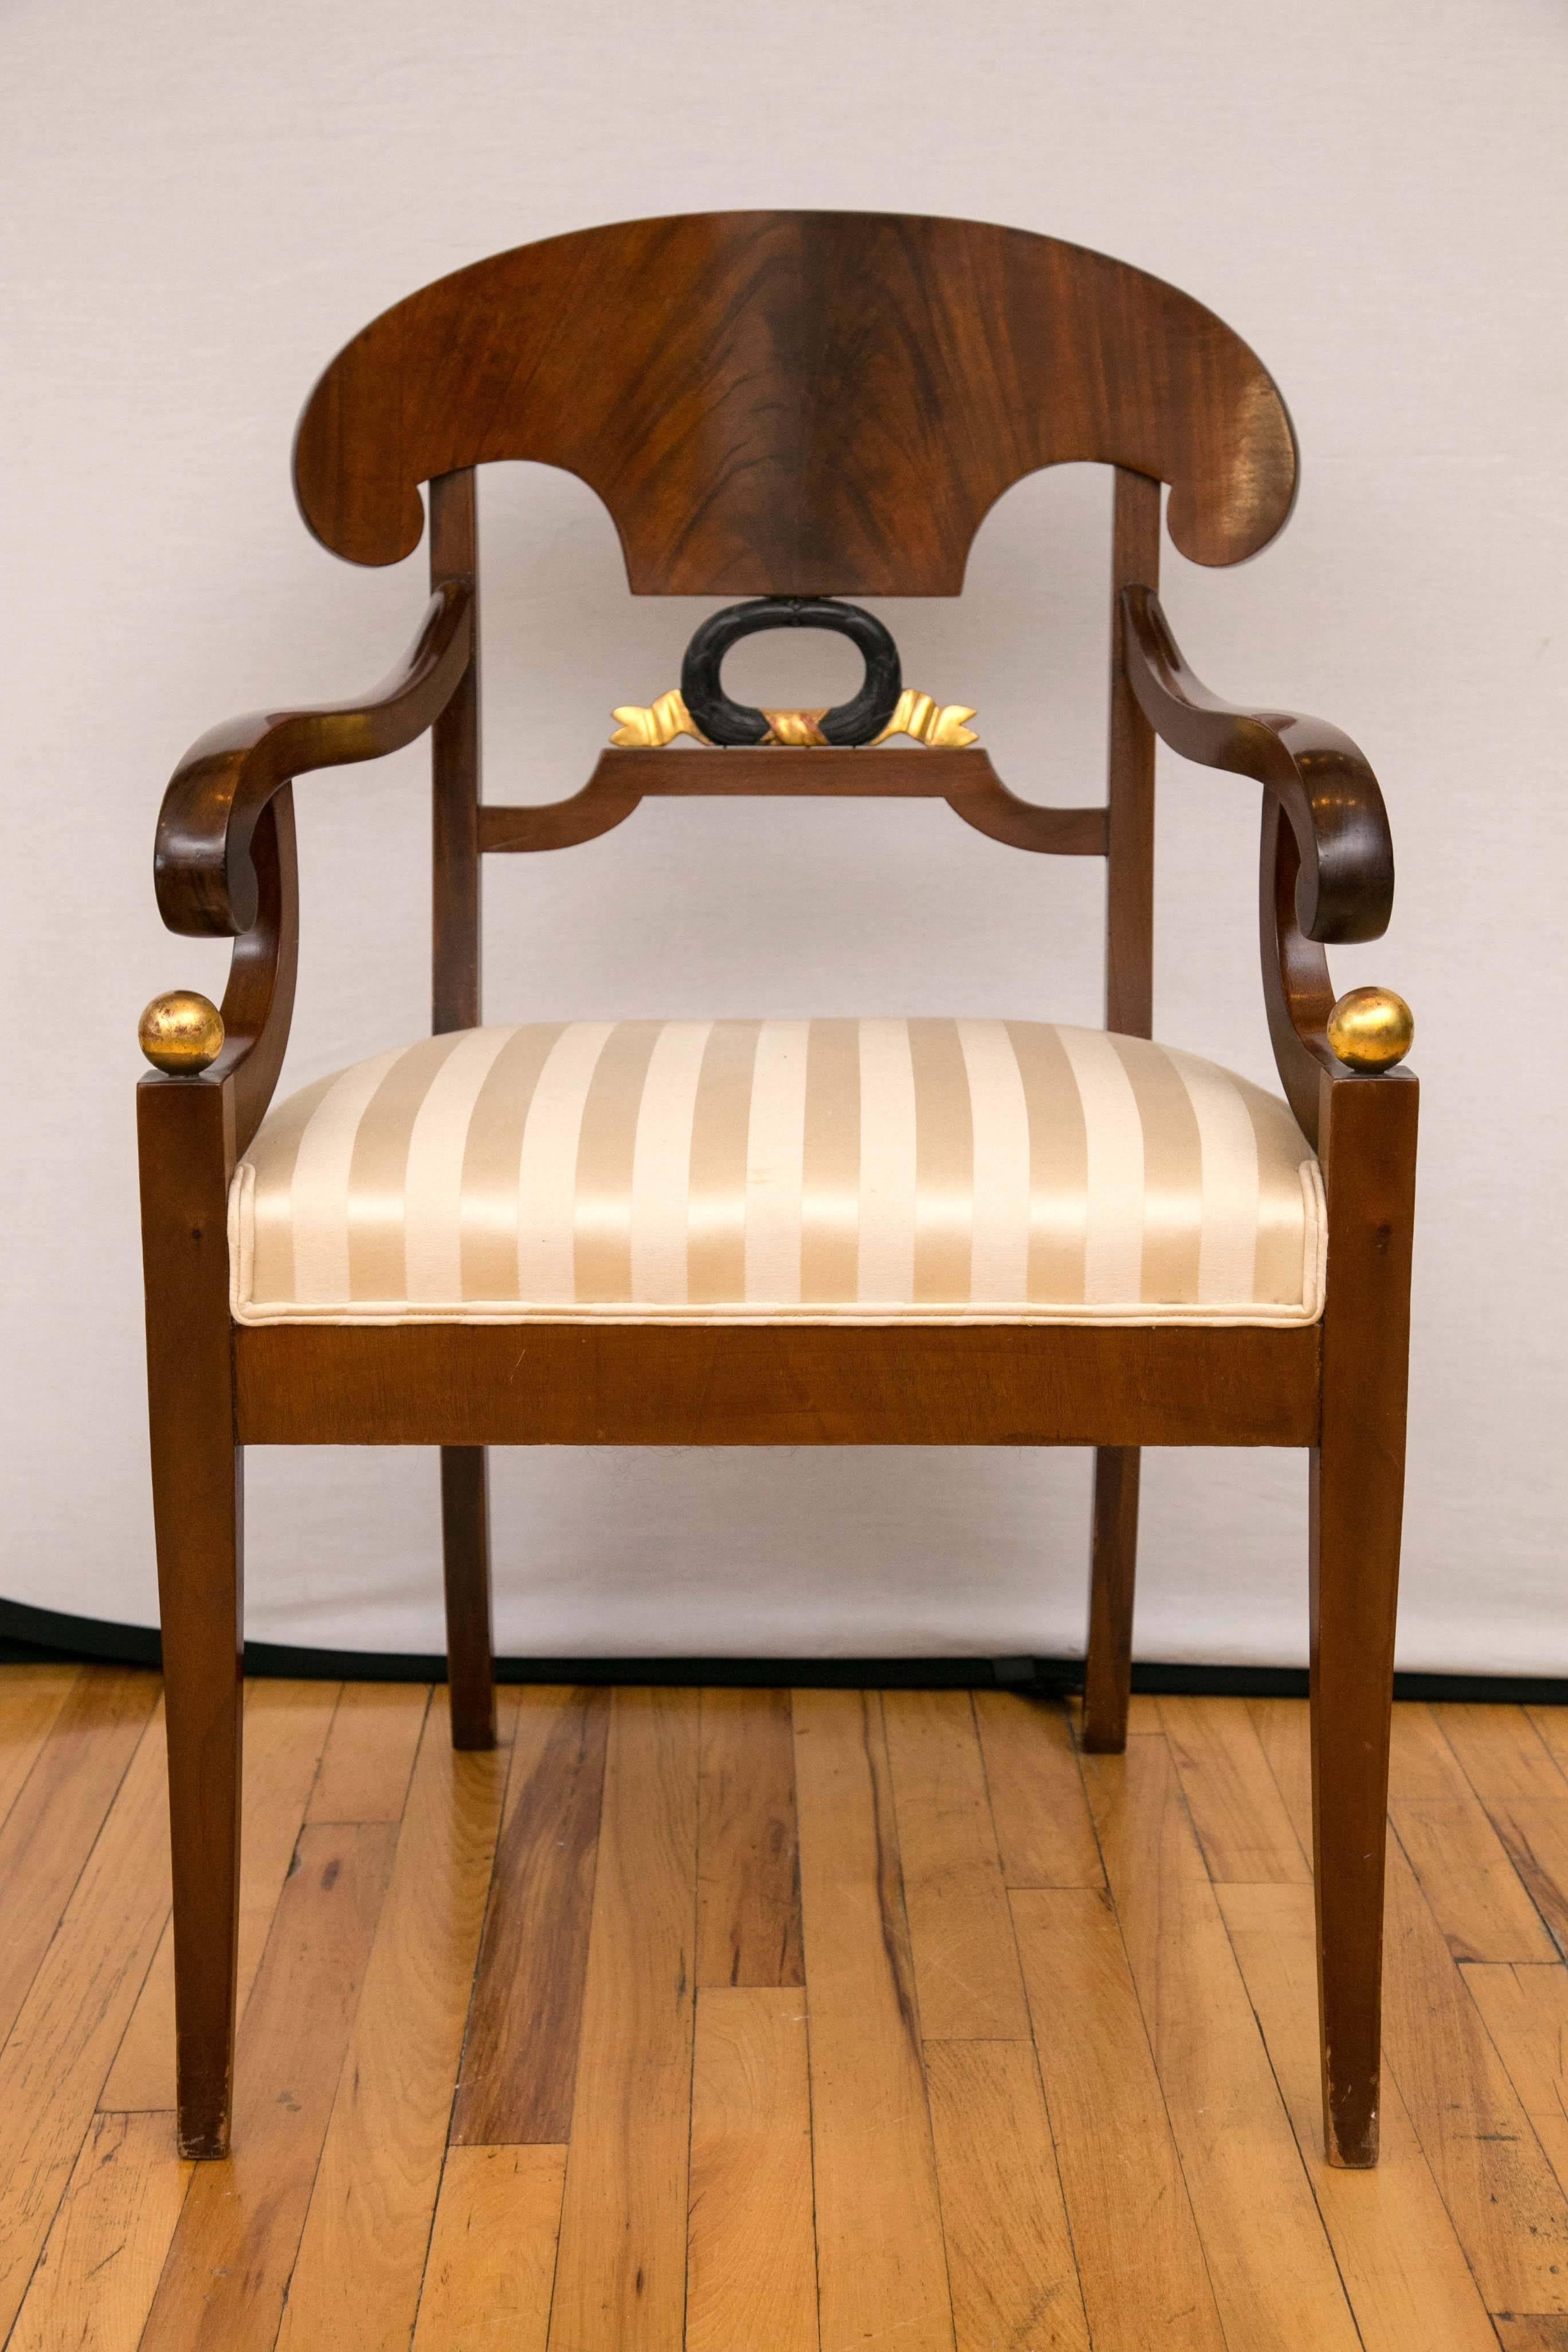 An exquisite pair of armchairs. This pair of Biedermeier armchairs feature fountain form back, scrolled arms joining the from legs topped with a gilt ball motif. The armchairs are raised on four saber legs. Wonderful rich color.